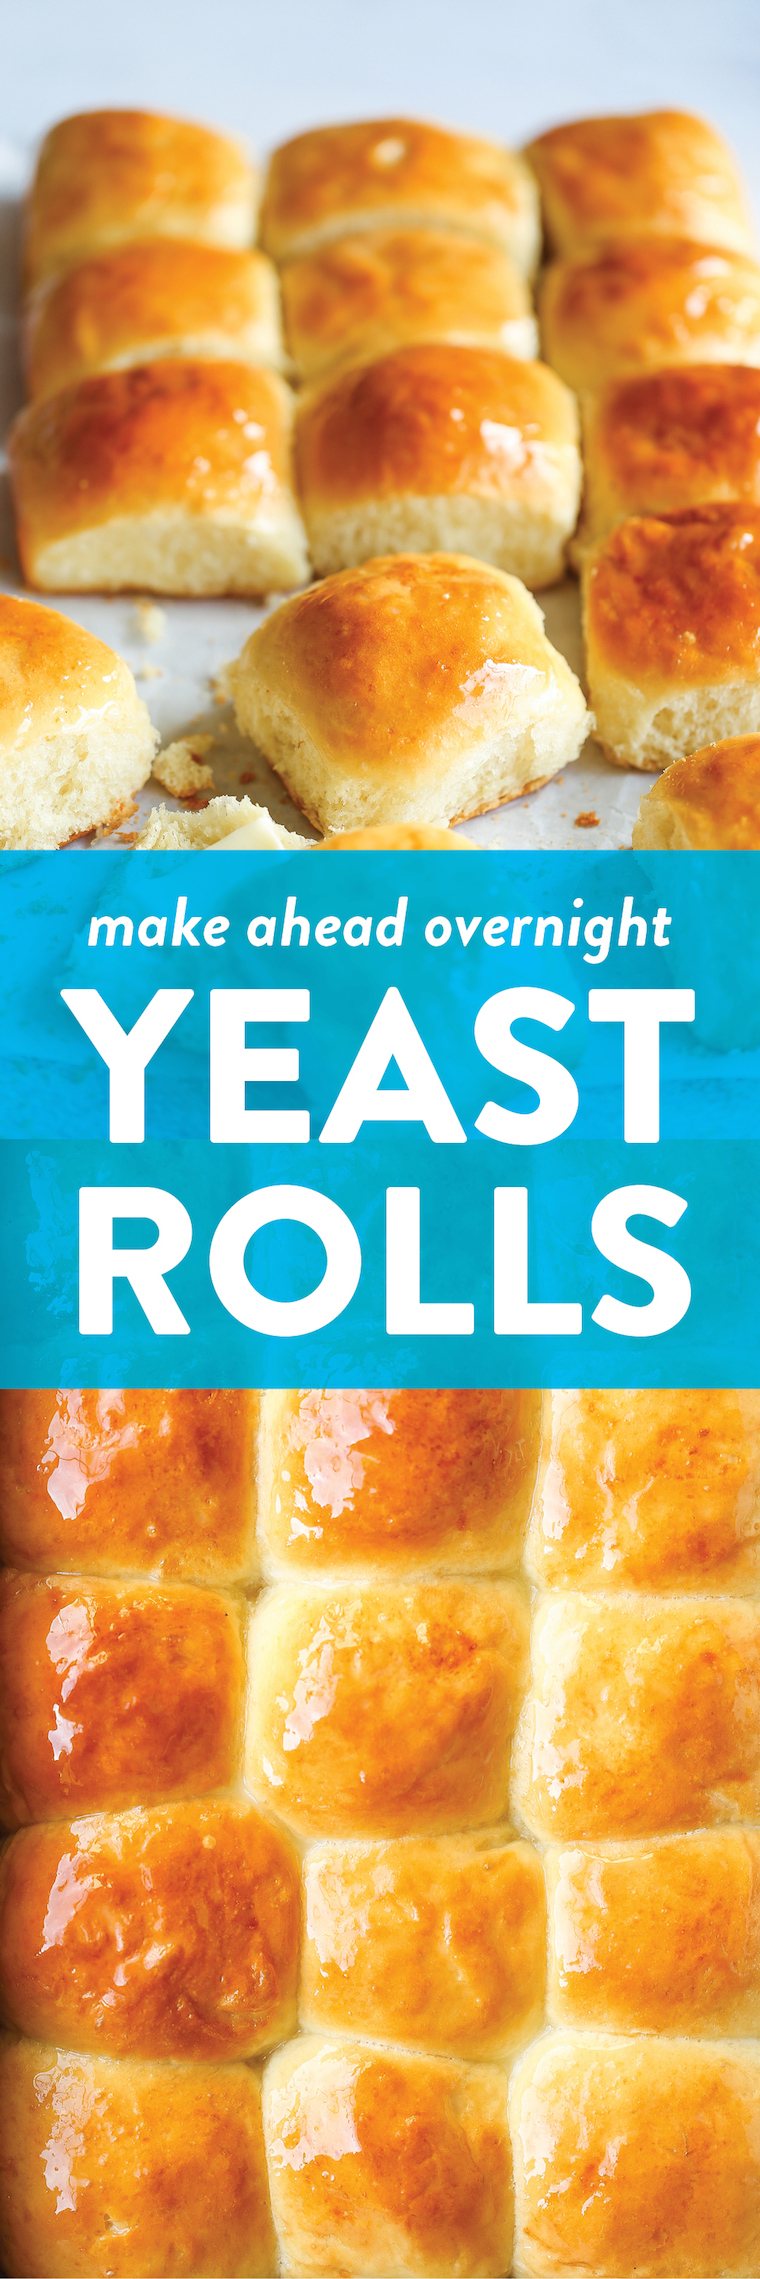 Make Ahead Yeast Rolls - Make-ahead overnight dinner rolls? YES, PLEASE! And they come out amazingly soft + buttery. I bet you can't stop with just 1 roll!